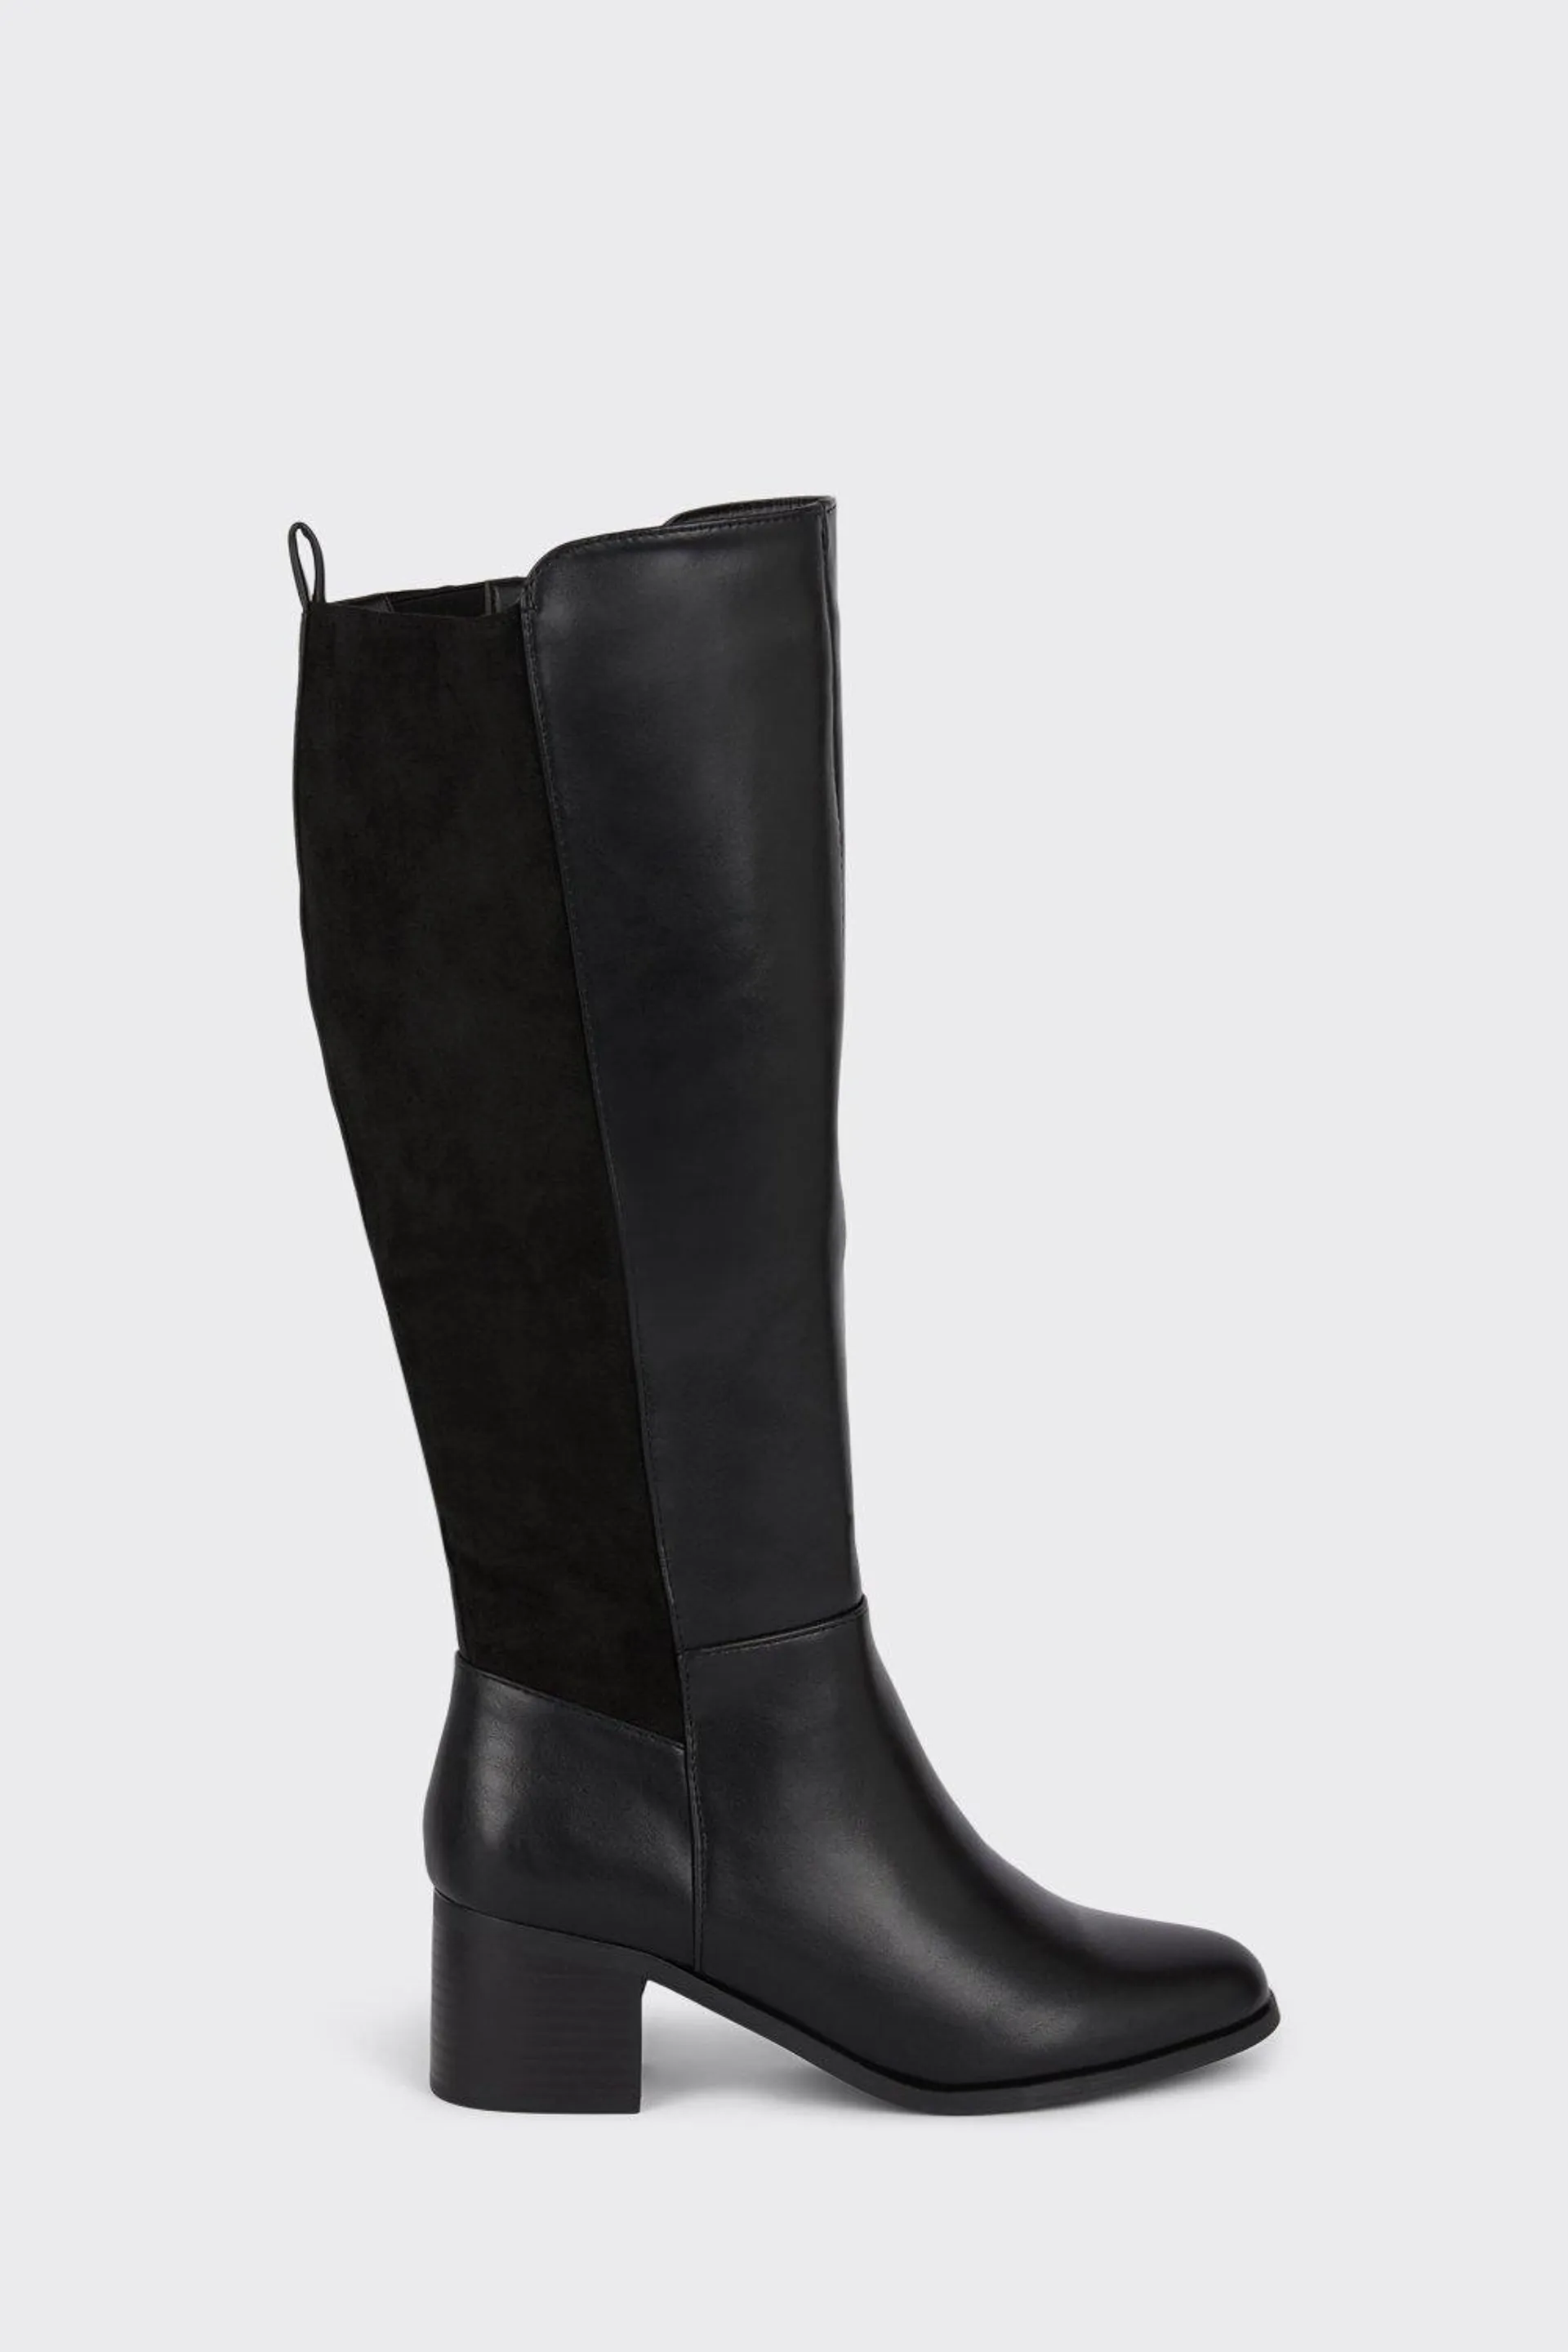 Haven Classic Block Heeled Knee High Boots